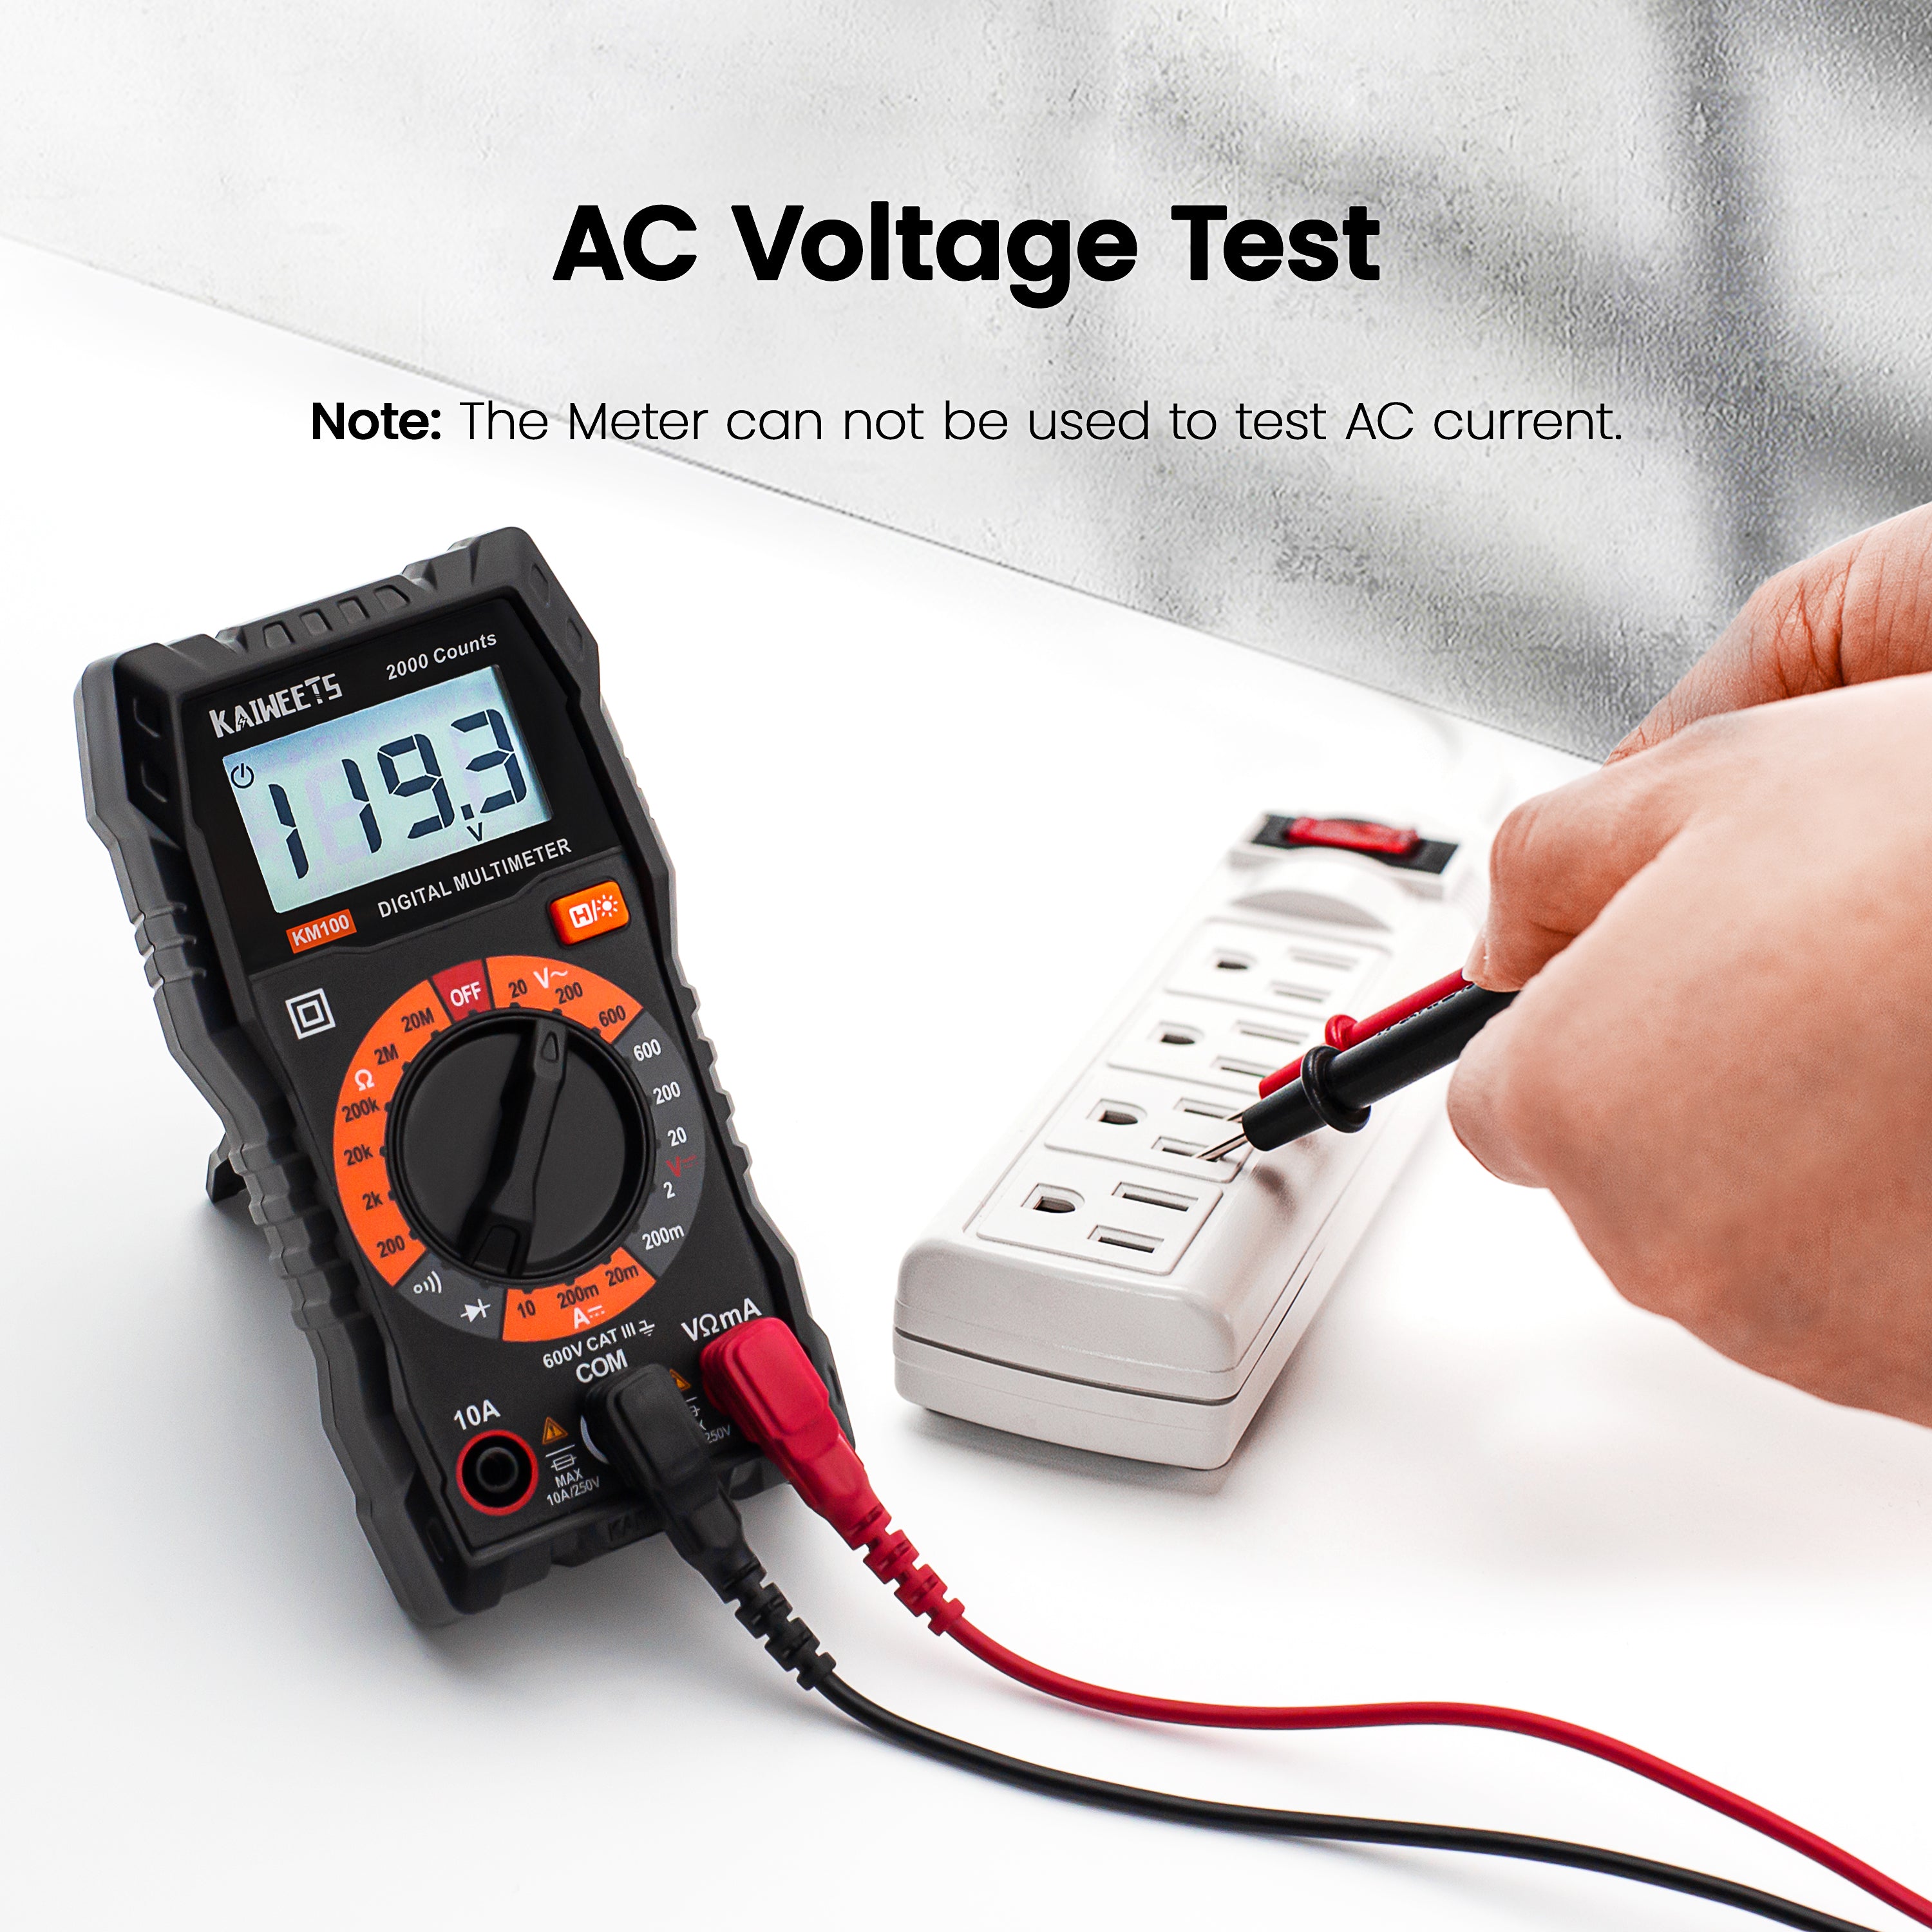 Digital Multimeter with Case, DC AC Voltmeter, Ohm Volt Amp Test Meter and Continuity Test Diode Voltage Tester for Household Outlet, Automotive Battery Test (Anti-Burn with Double Fuses)